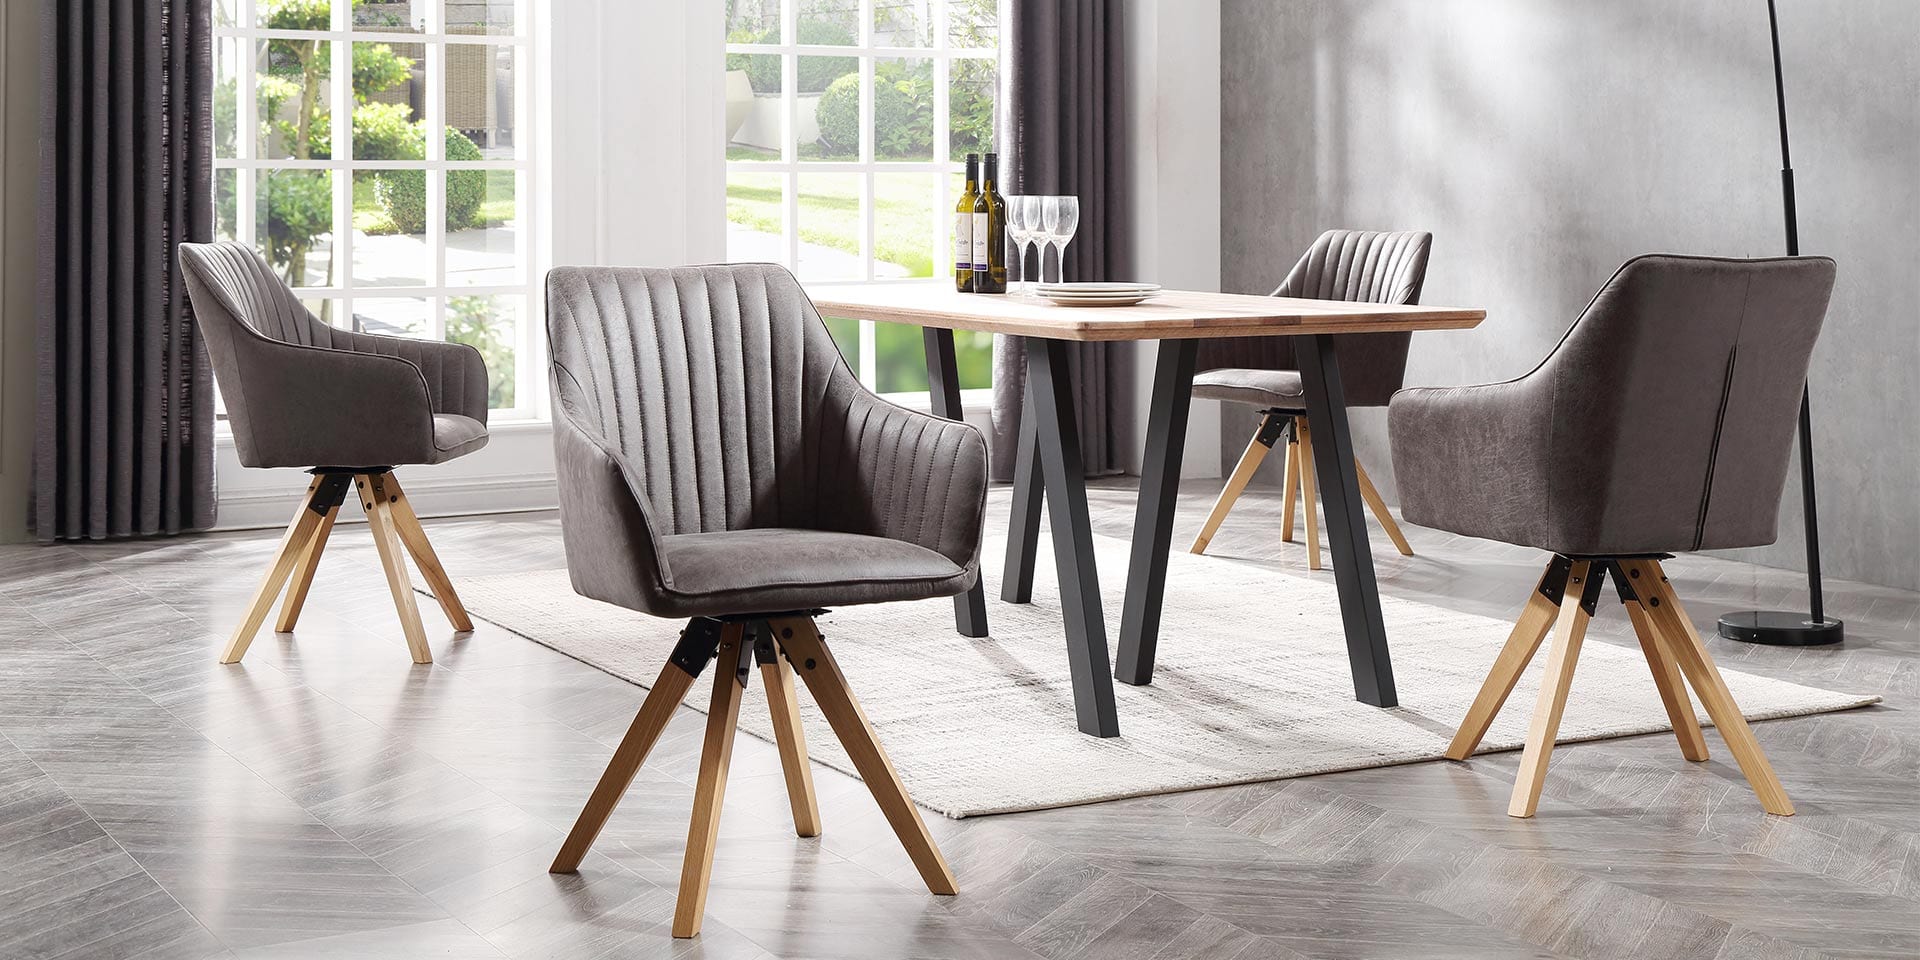 TXJ dining tables and dining chairs